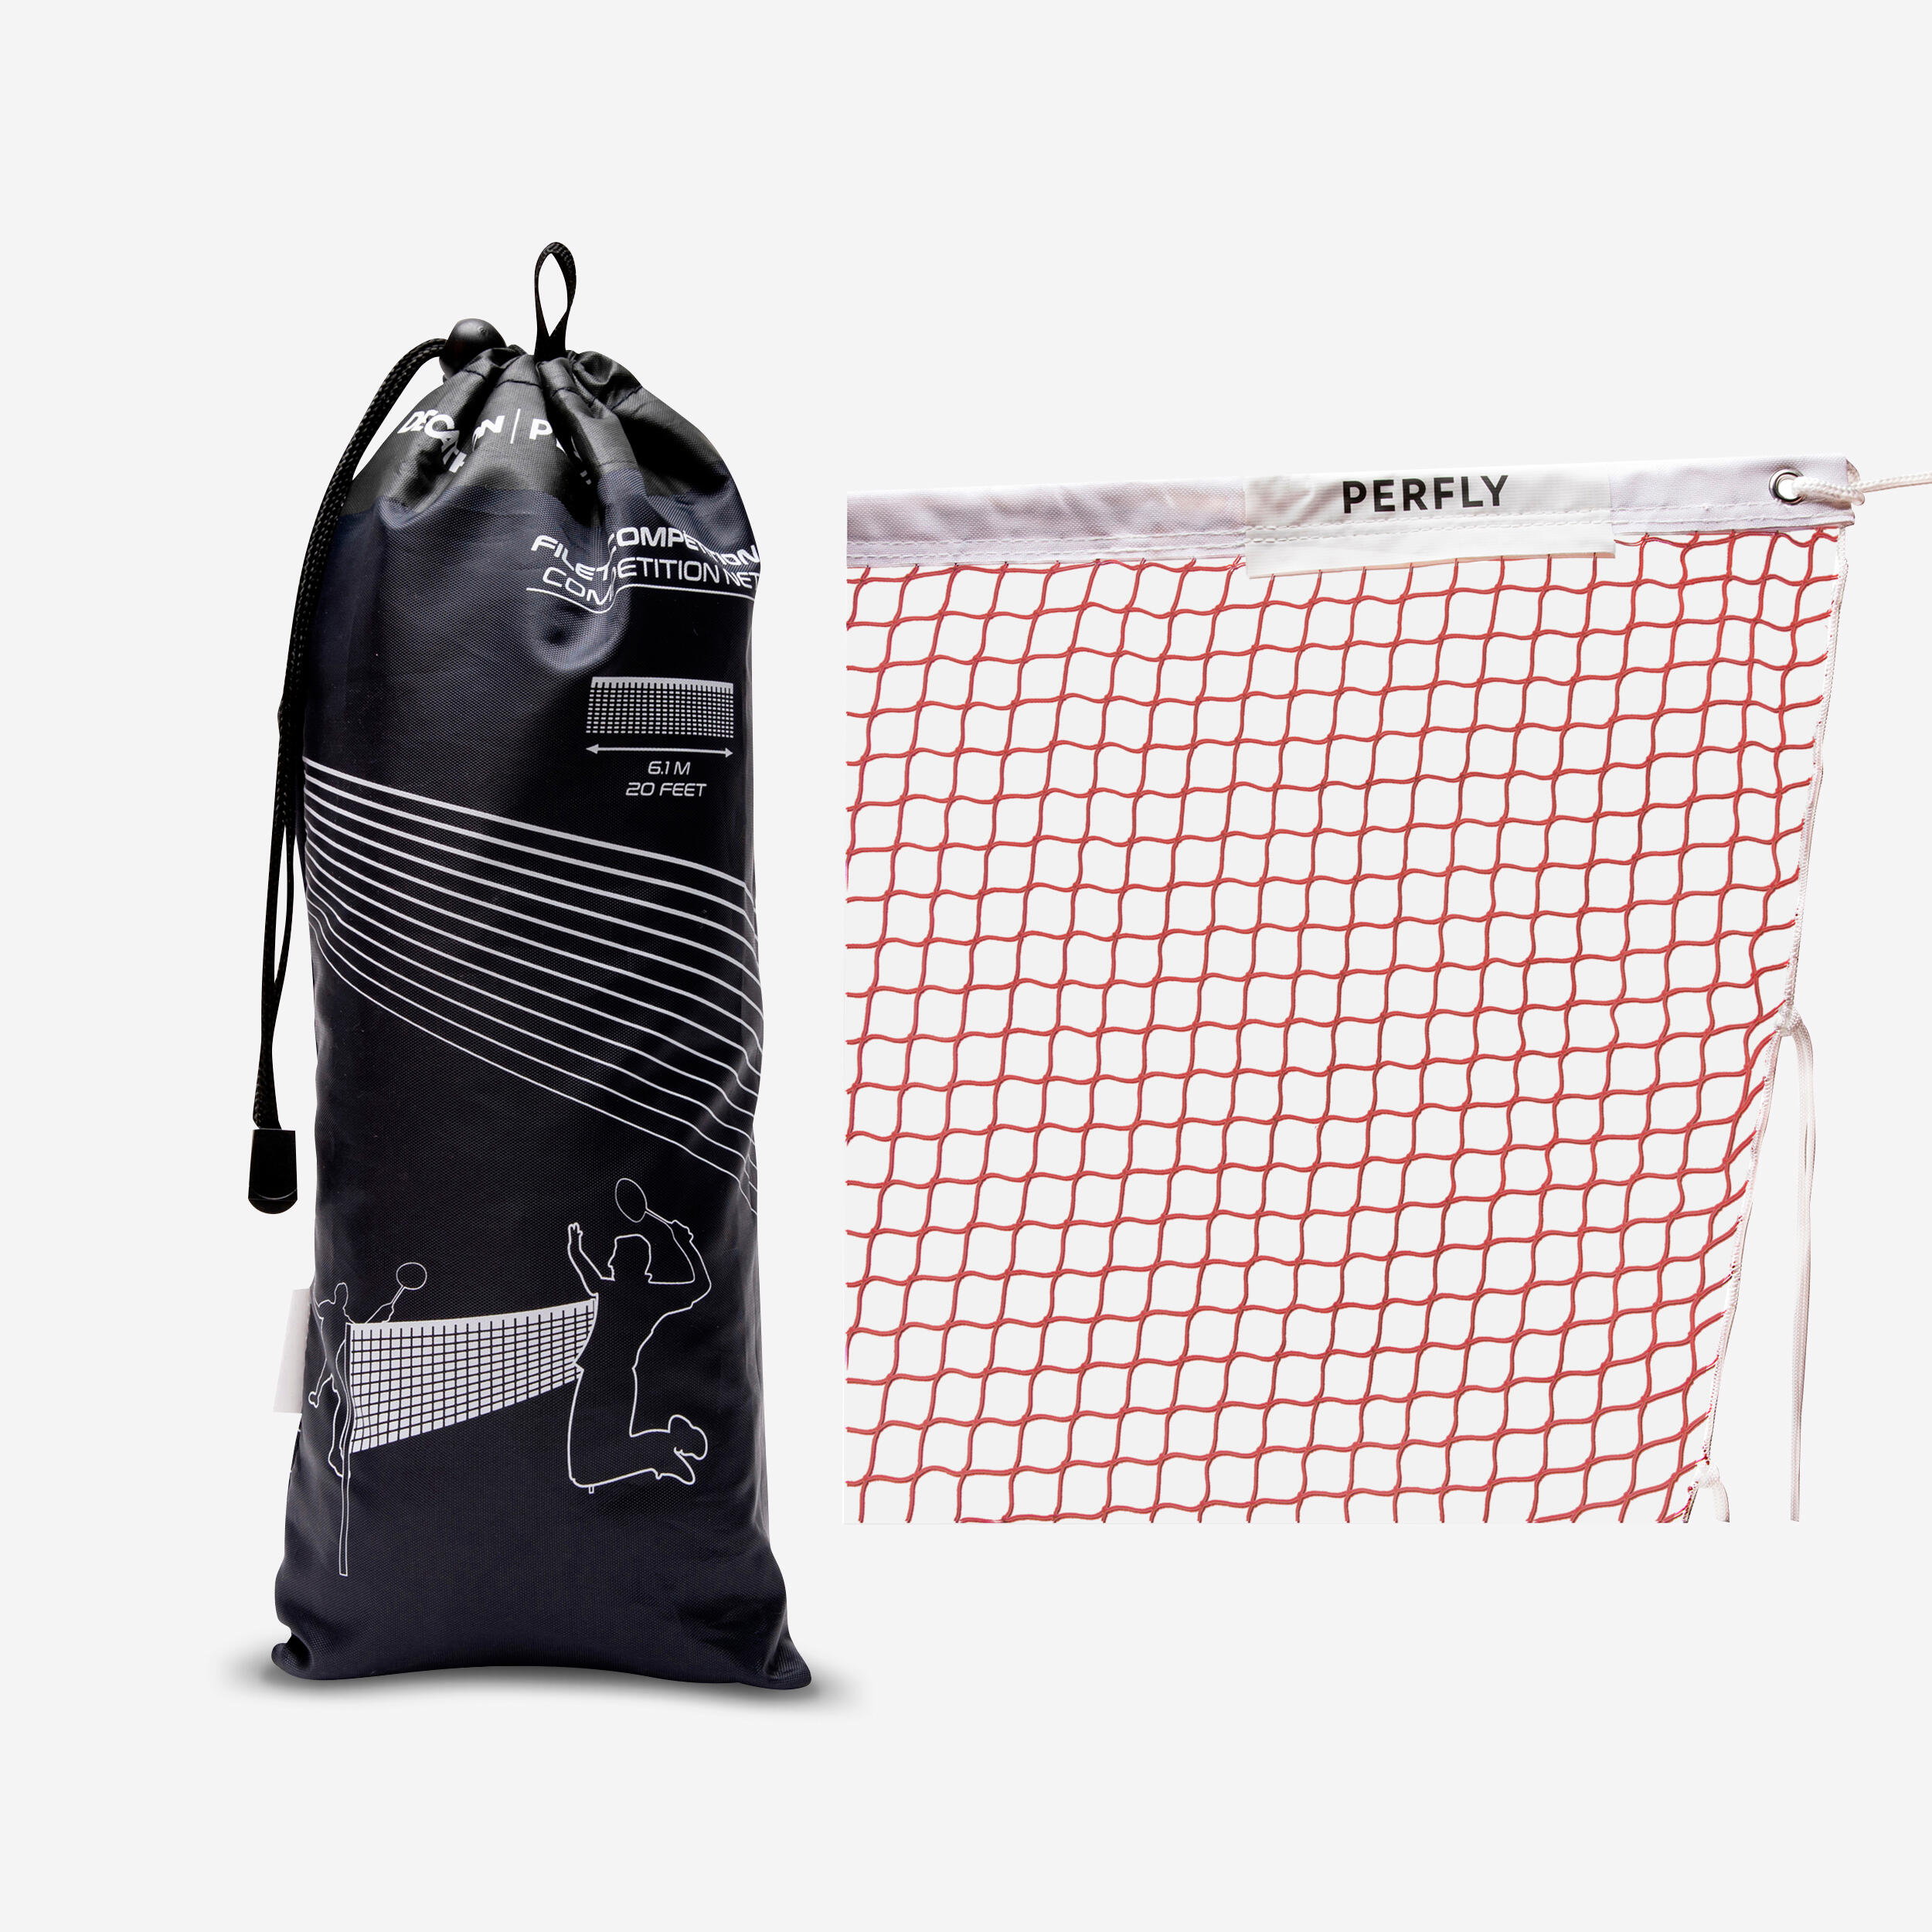 PERFLY BADMINTON COMPETITION NET BLACK